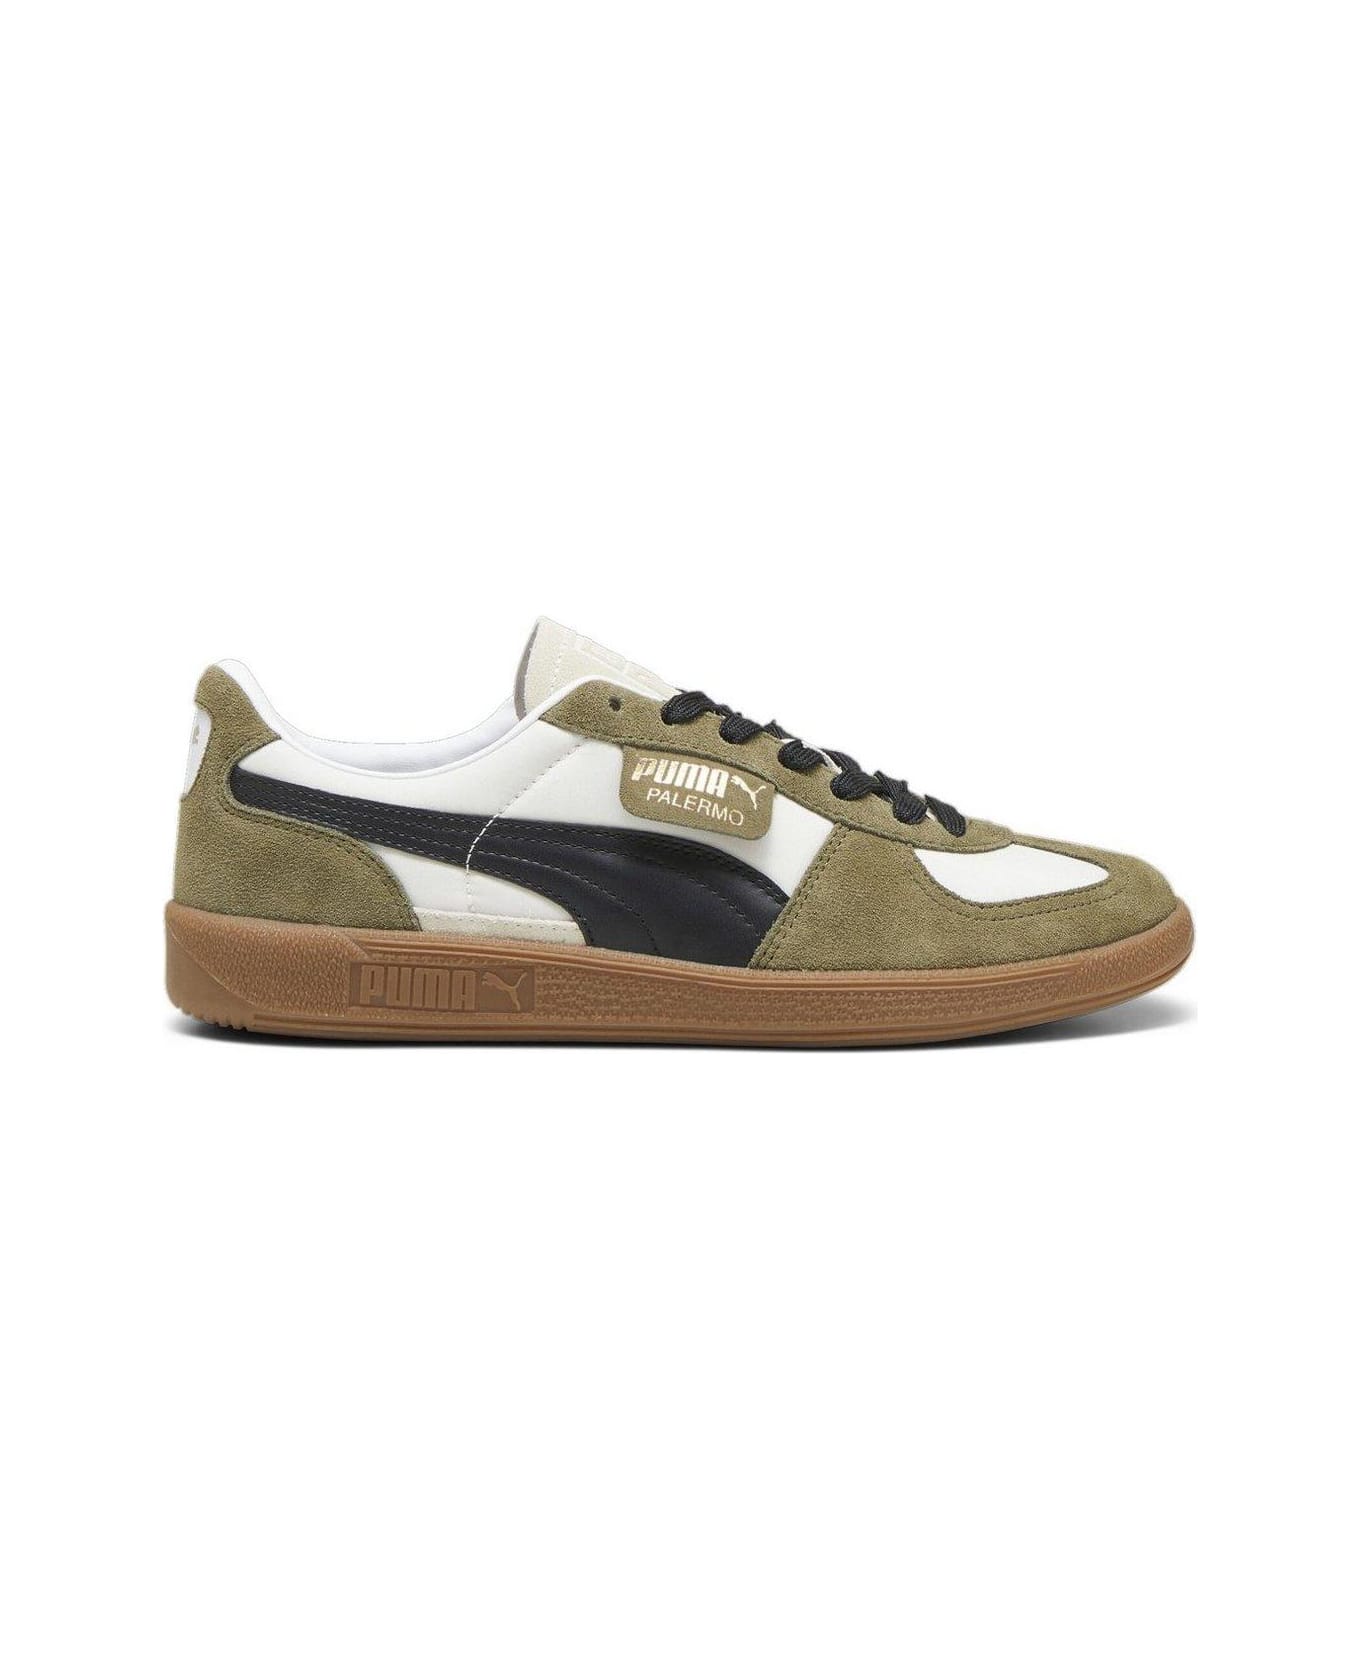 Puma Palermo Og Lace-up Sneakers - Beige